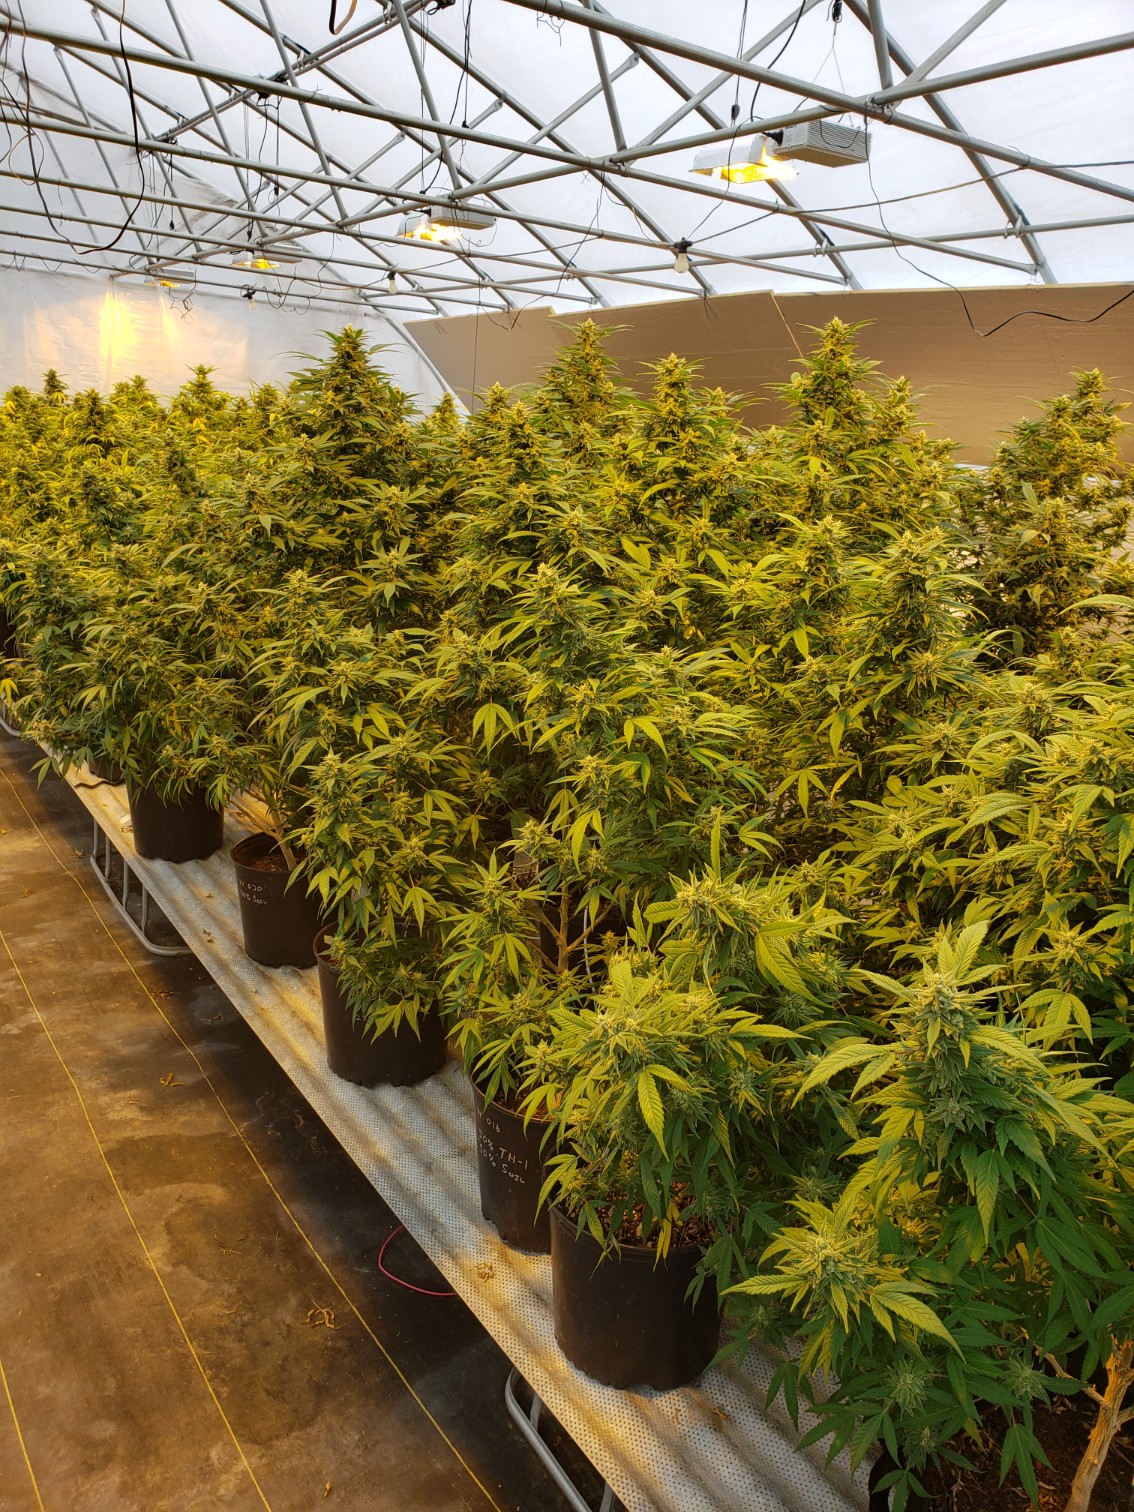 MacGrow Cultivation